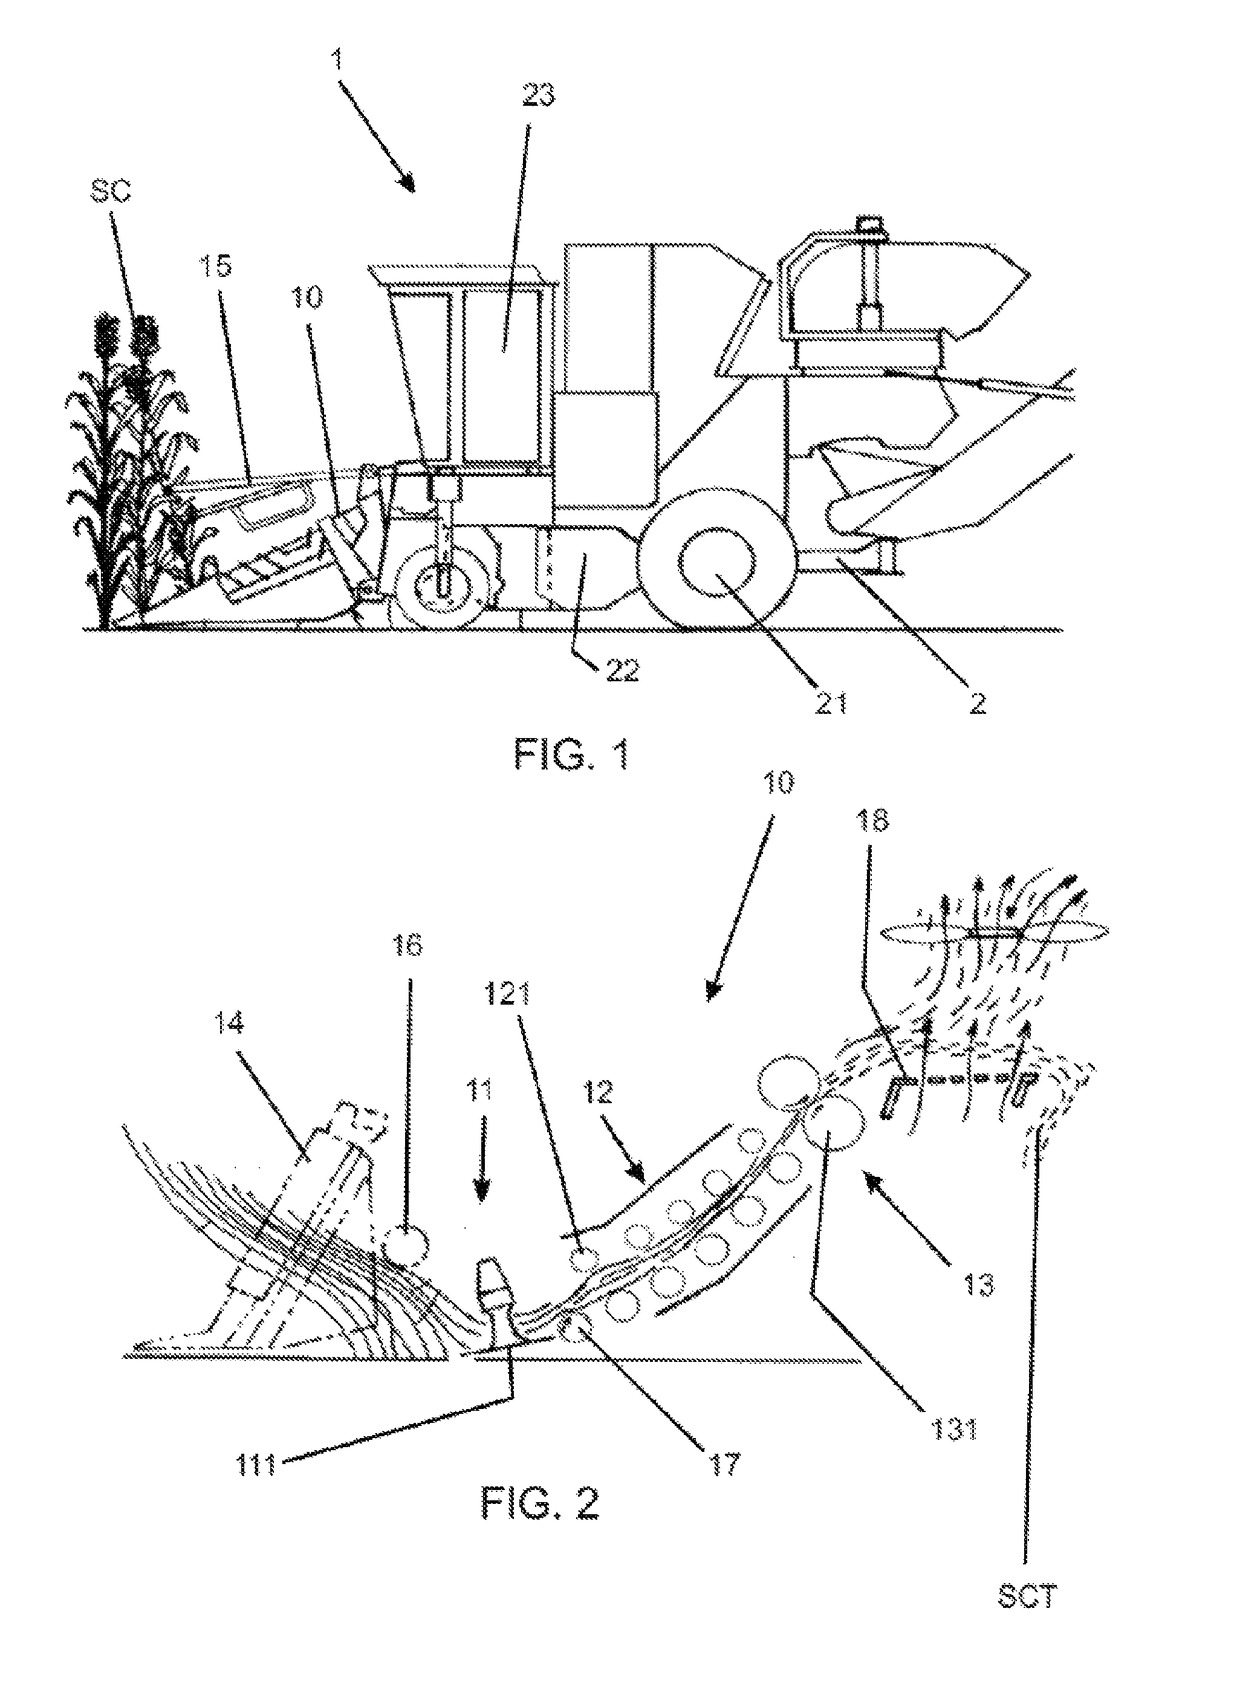 Method and system of operating an automotive harvester